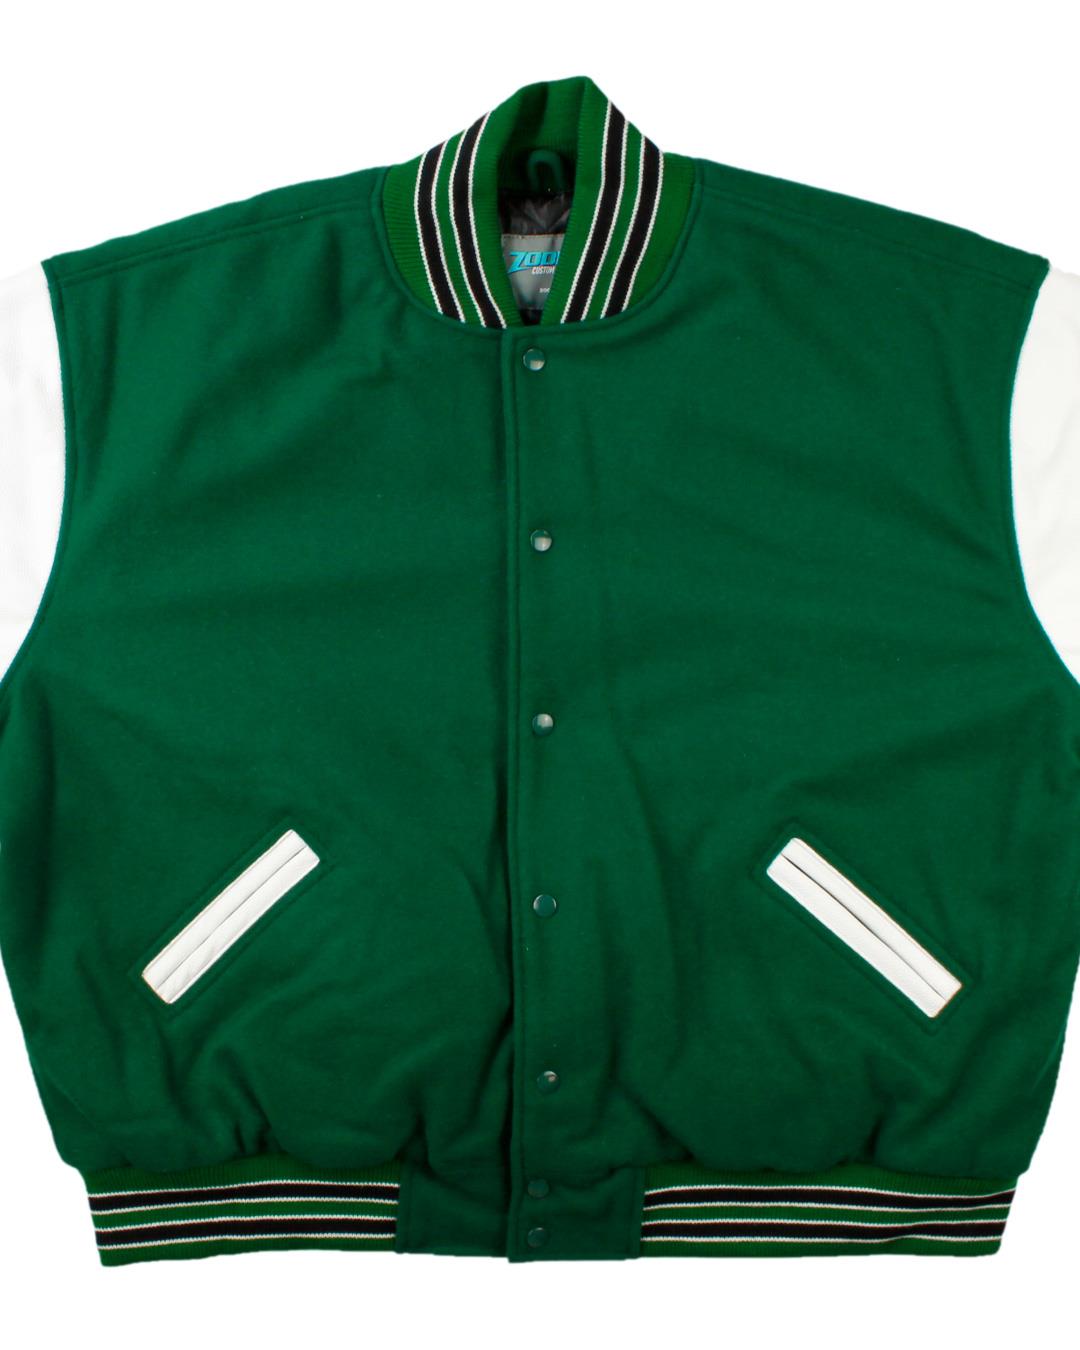 Greenfield High School Letterman, Greenfield, CA - Front